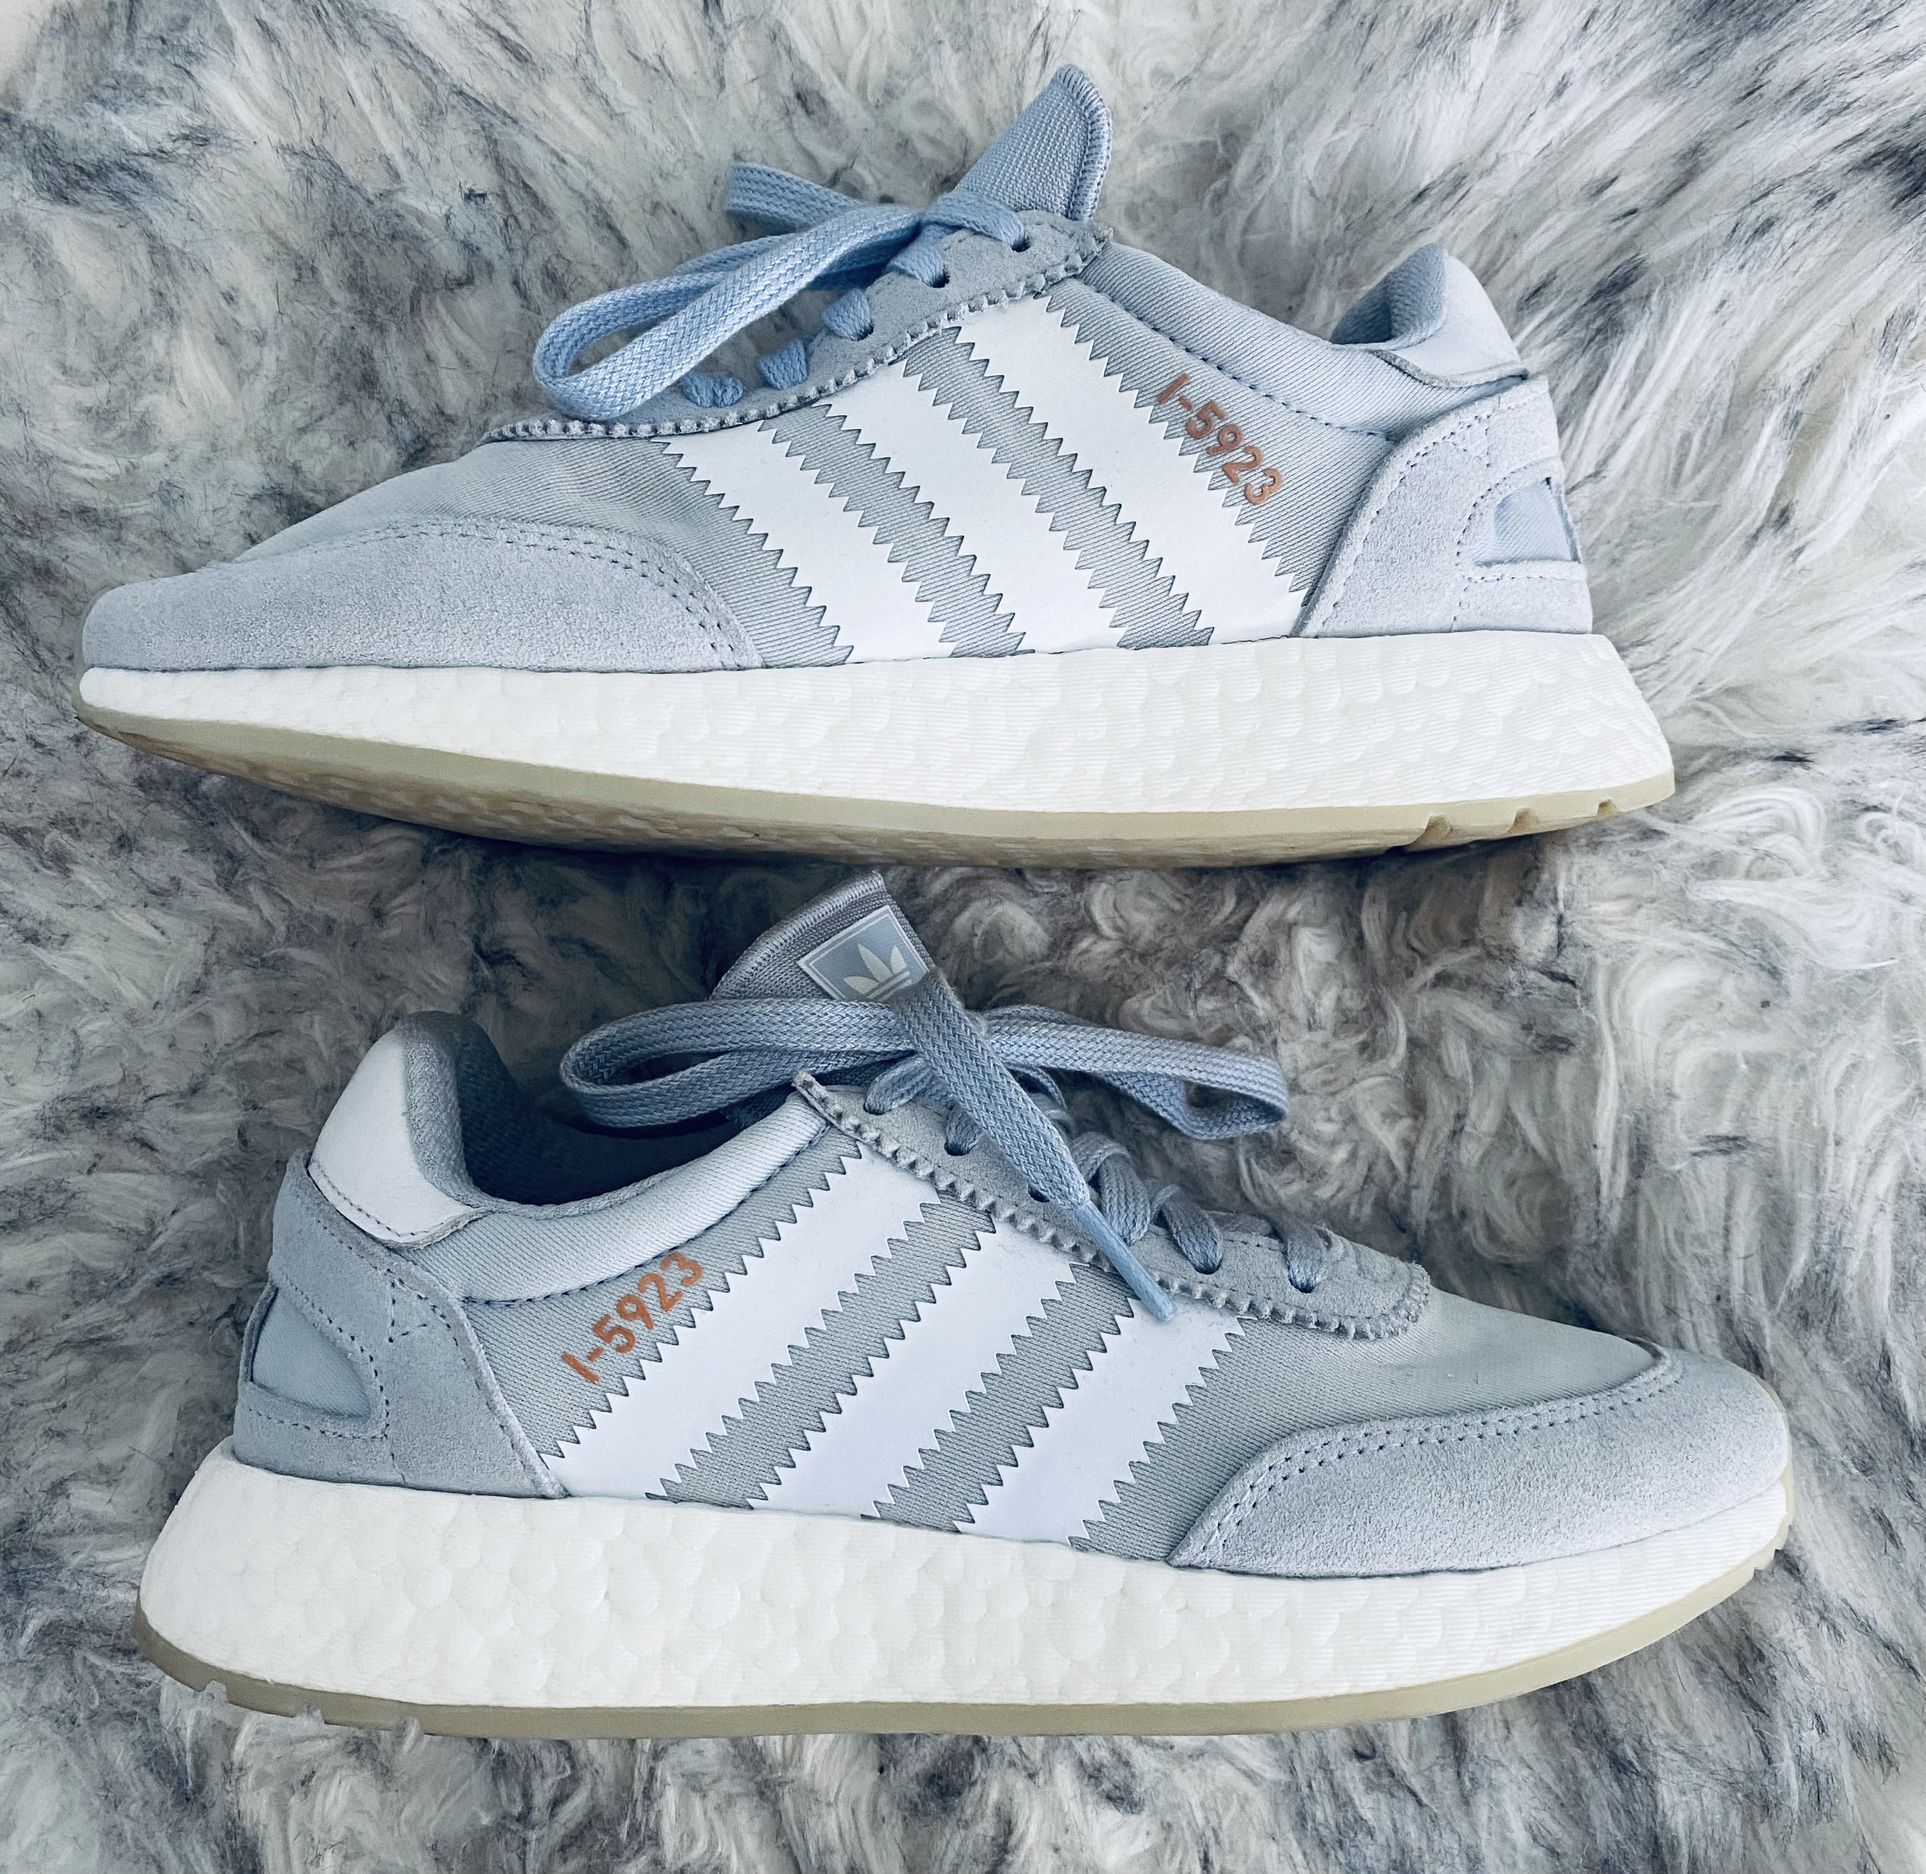 Adidas i-5923 size 6.5 Light Blue/Light Grey-Used, MAKE for Sale in Riverview, FL -